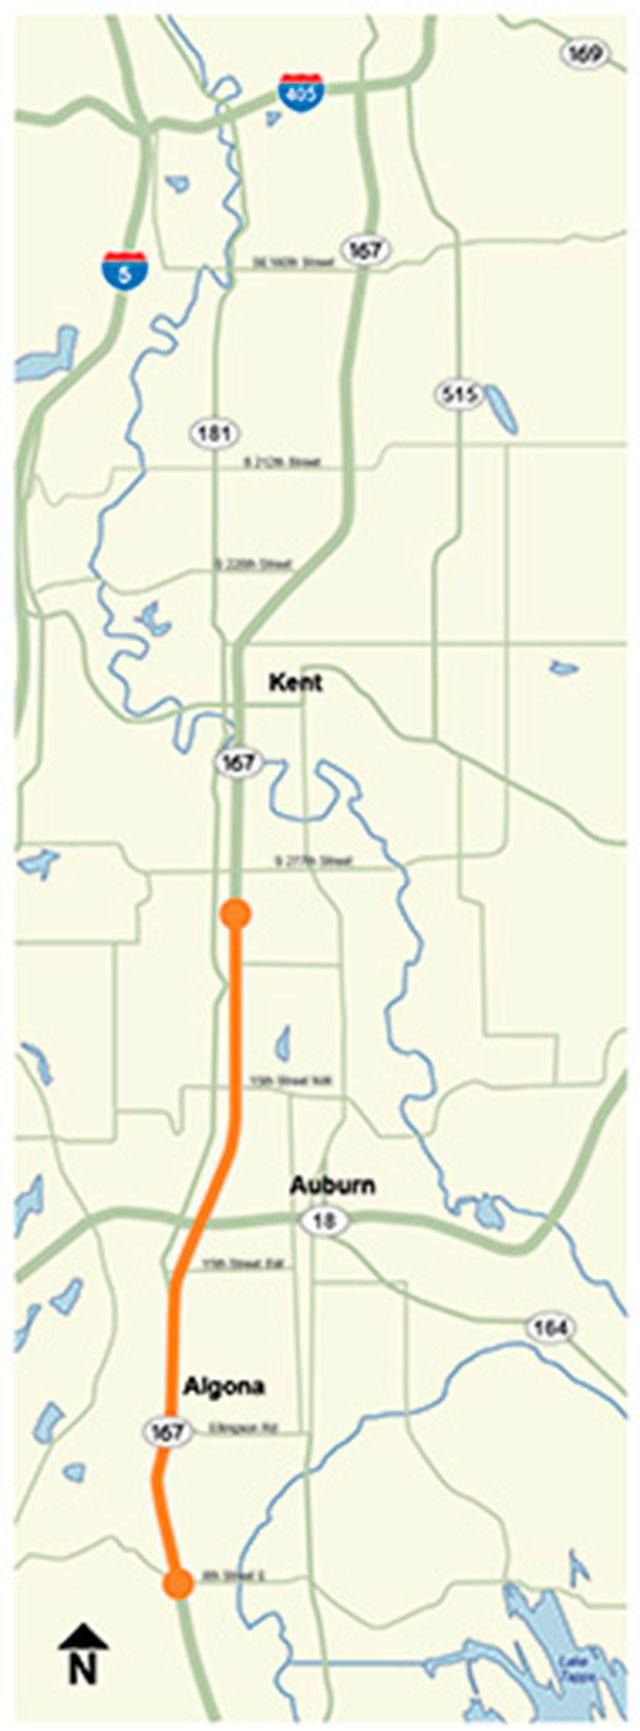 The project widens SR 167 to add a lane in the southbound direction from Kent to Auburn and extends the existing High Occupancy Toll (HOT) Lanes system south on SR 167 in the Green River Valley. COURTESY MAP, WSDOT